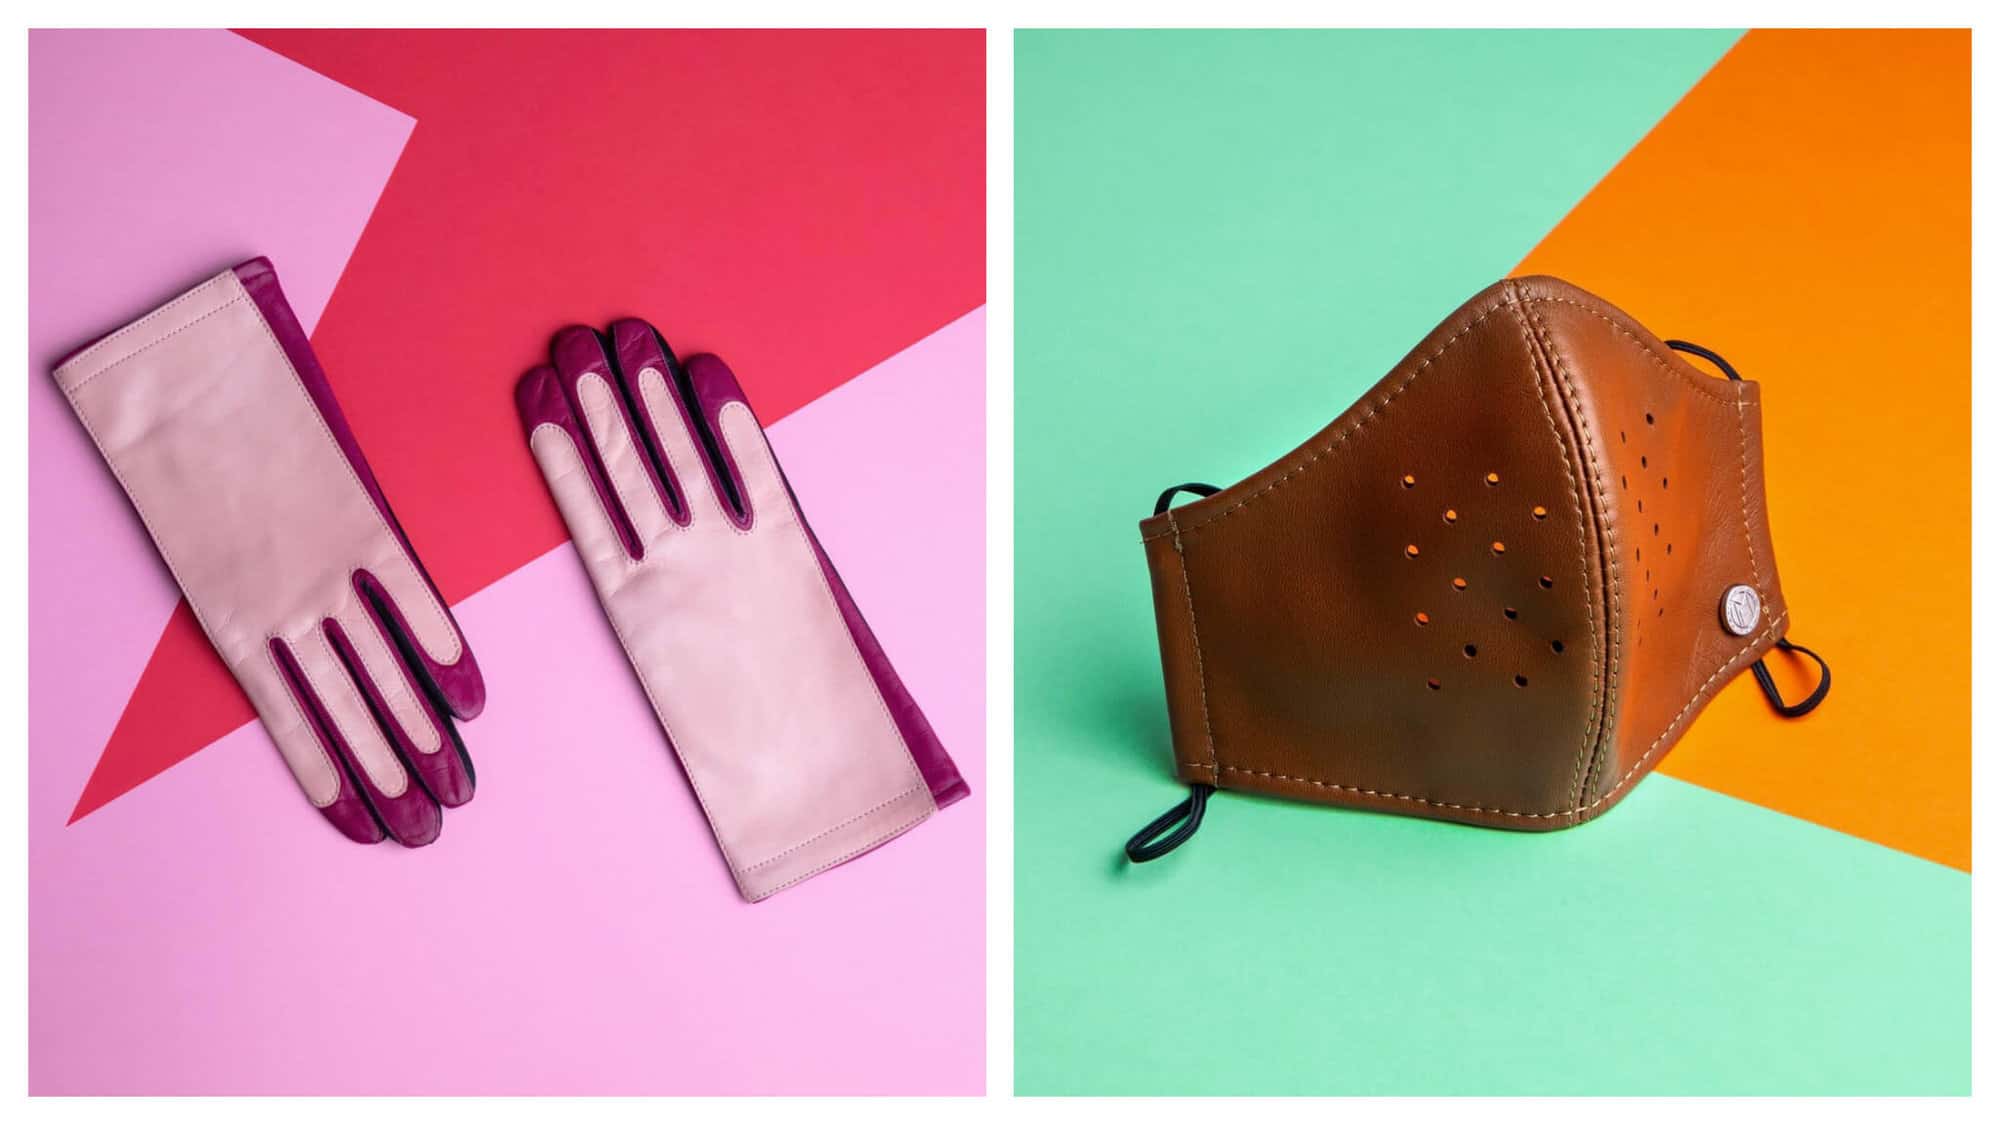 Left: an aerial view of a pair of gloves. The gloves are leather and are dark purple and light pink. They are on a light pink and dark pink background. Right: a brown leather mask with small holes for breathing. It is on a green and orange background.